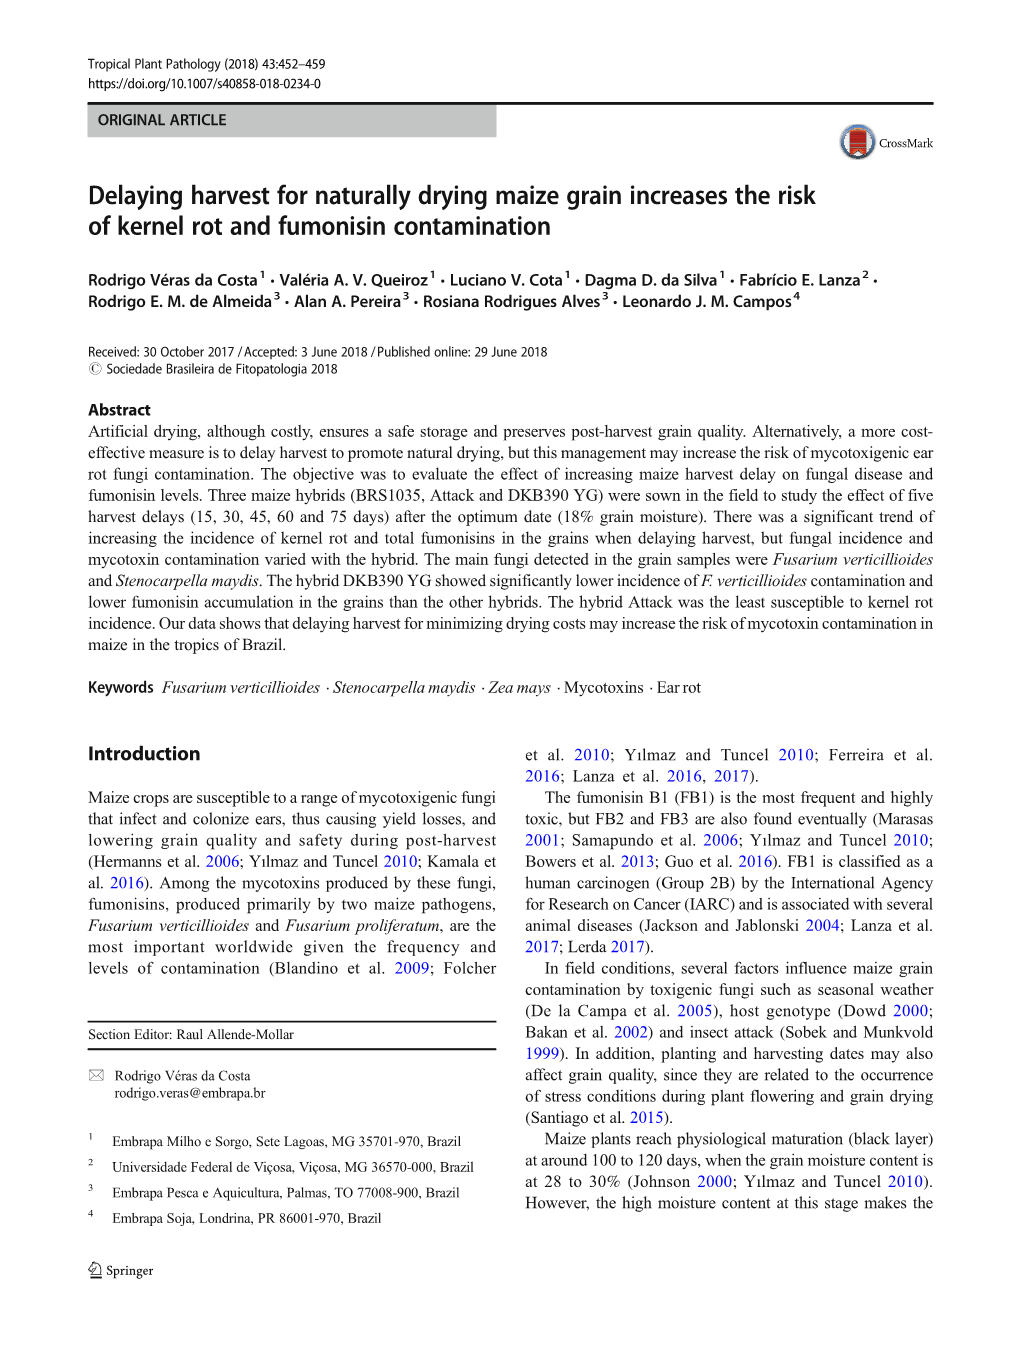 Delaying Harvest for Naturally Drying Maize Grain Increases the Risk of Kernel Rot and Fumonisin Contamination